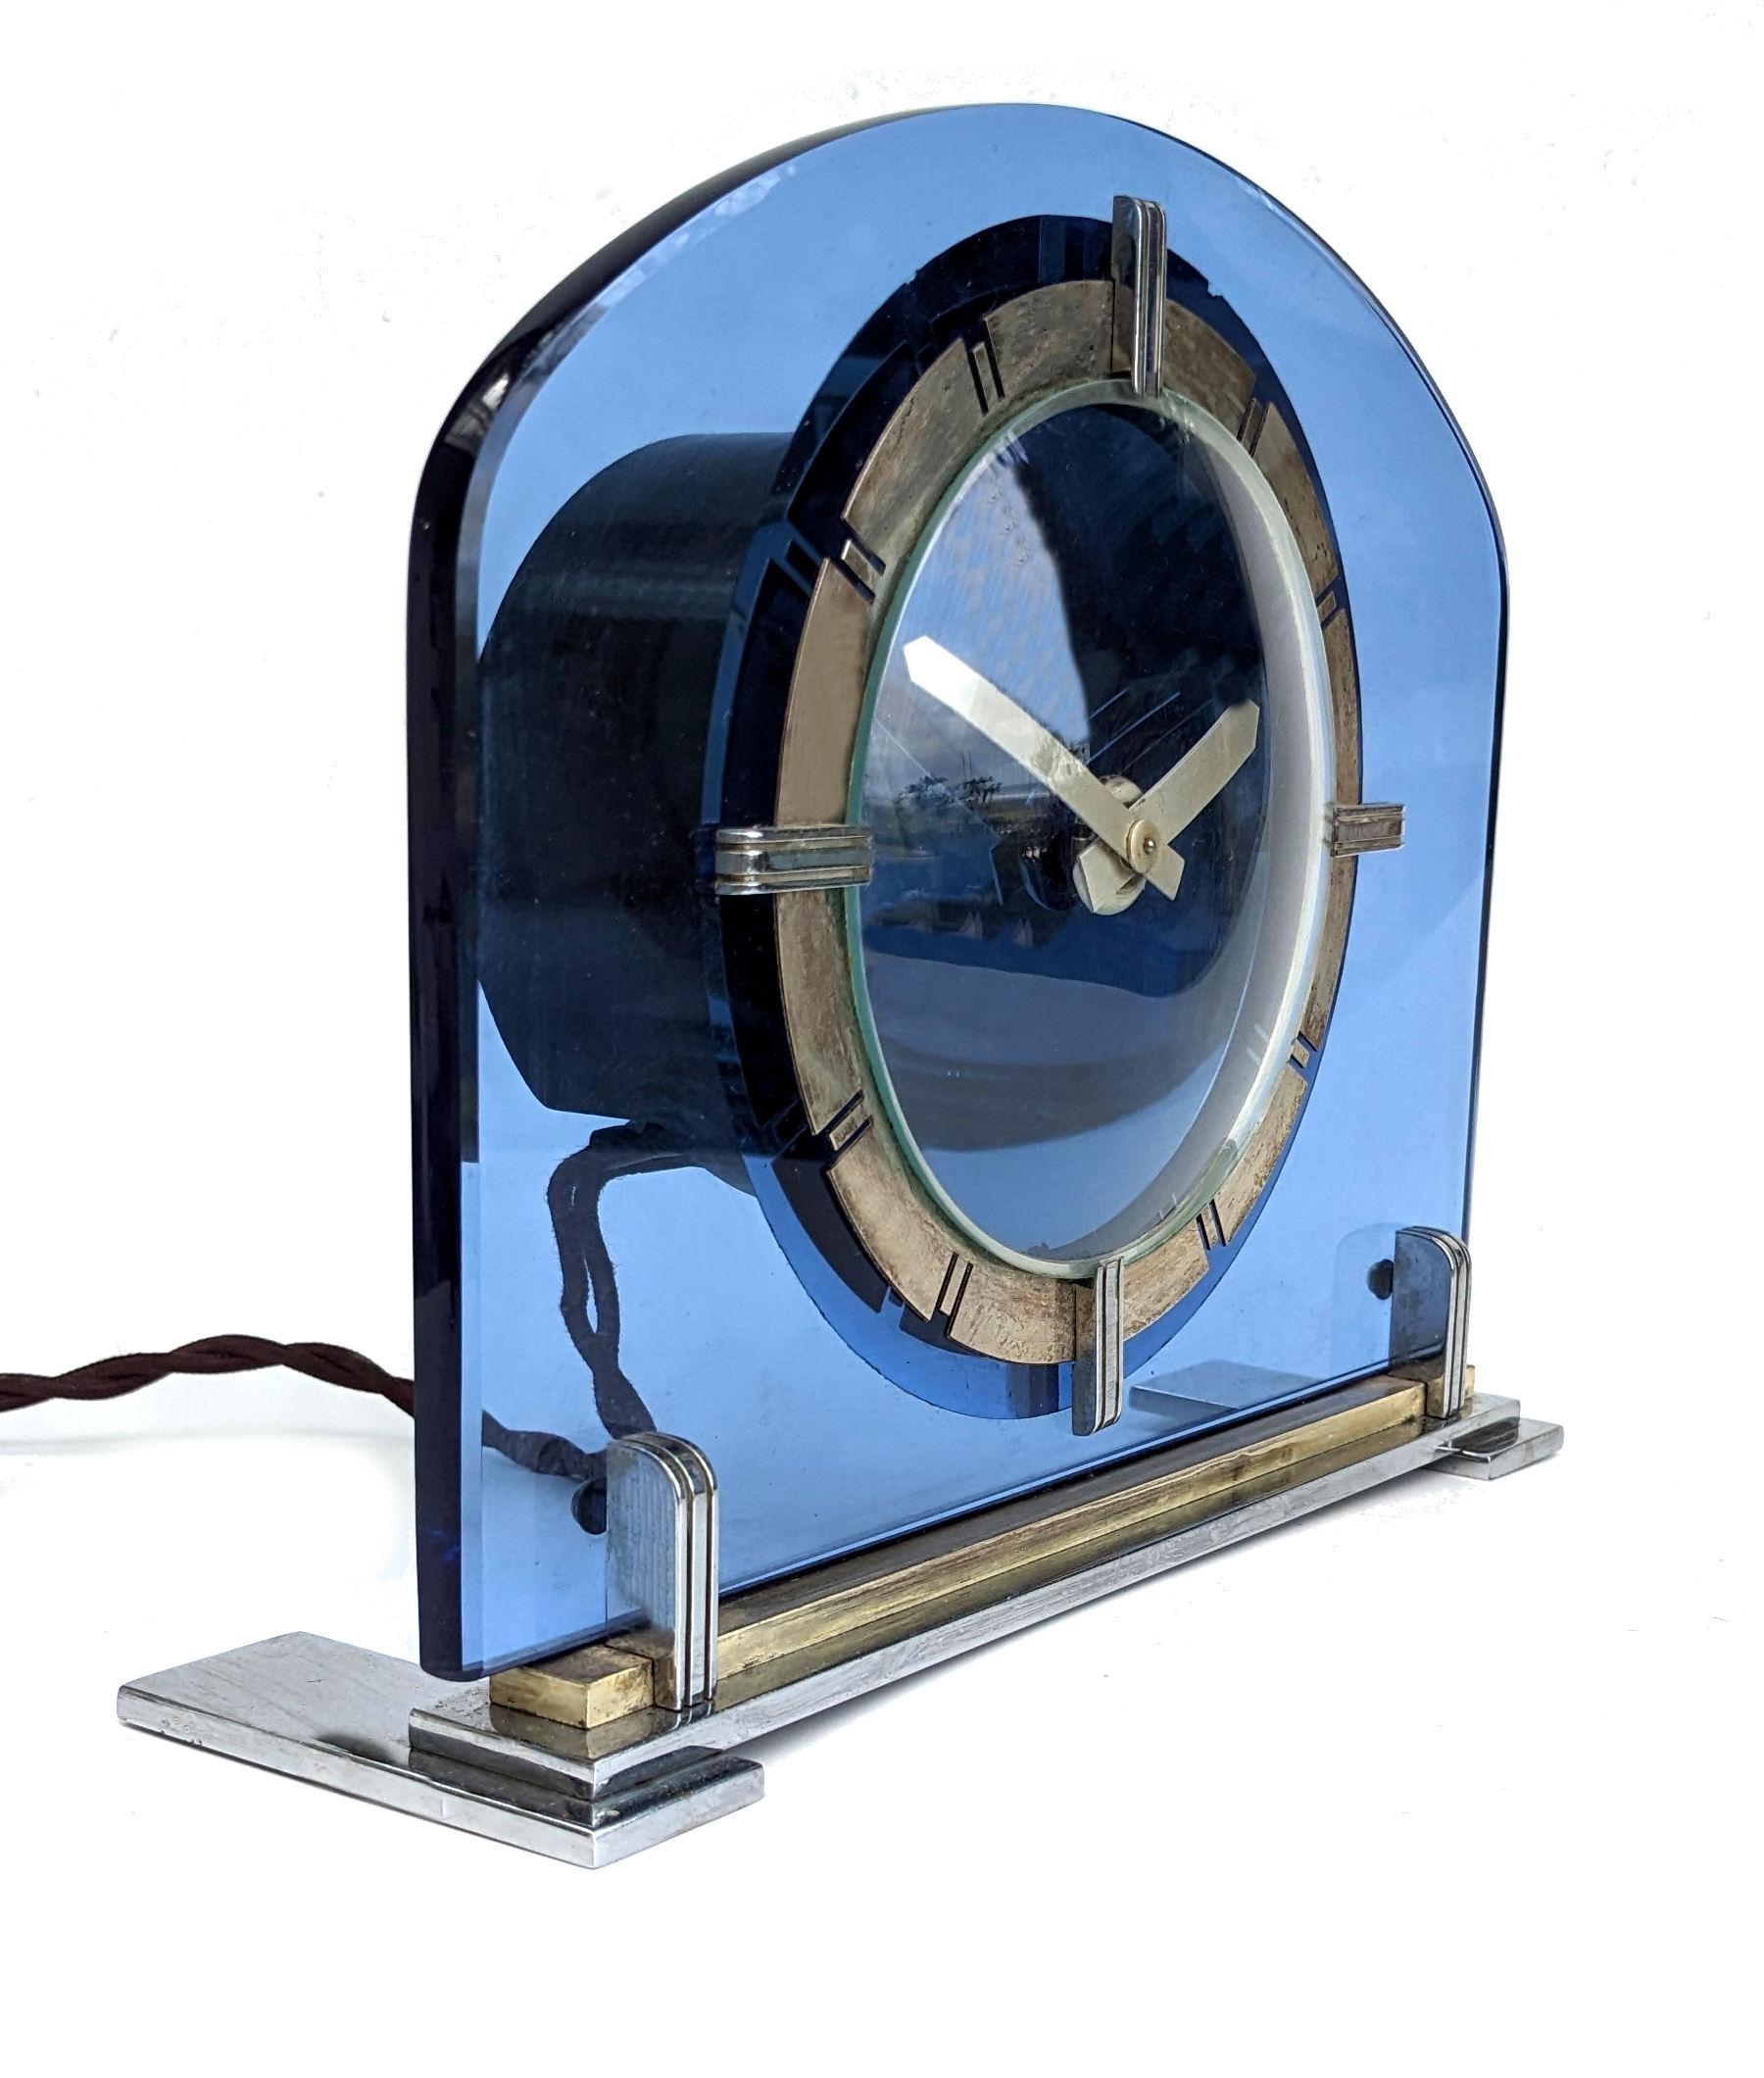 Art Deco Smiths Blue Glass, Brass Electric Mantle Clock, c1930 In Good Condition For Sale In Devon, England